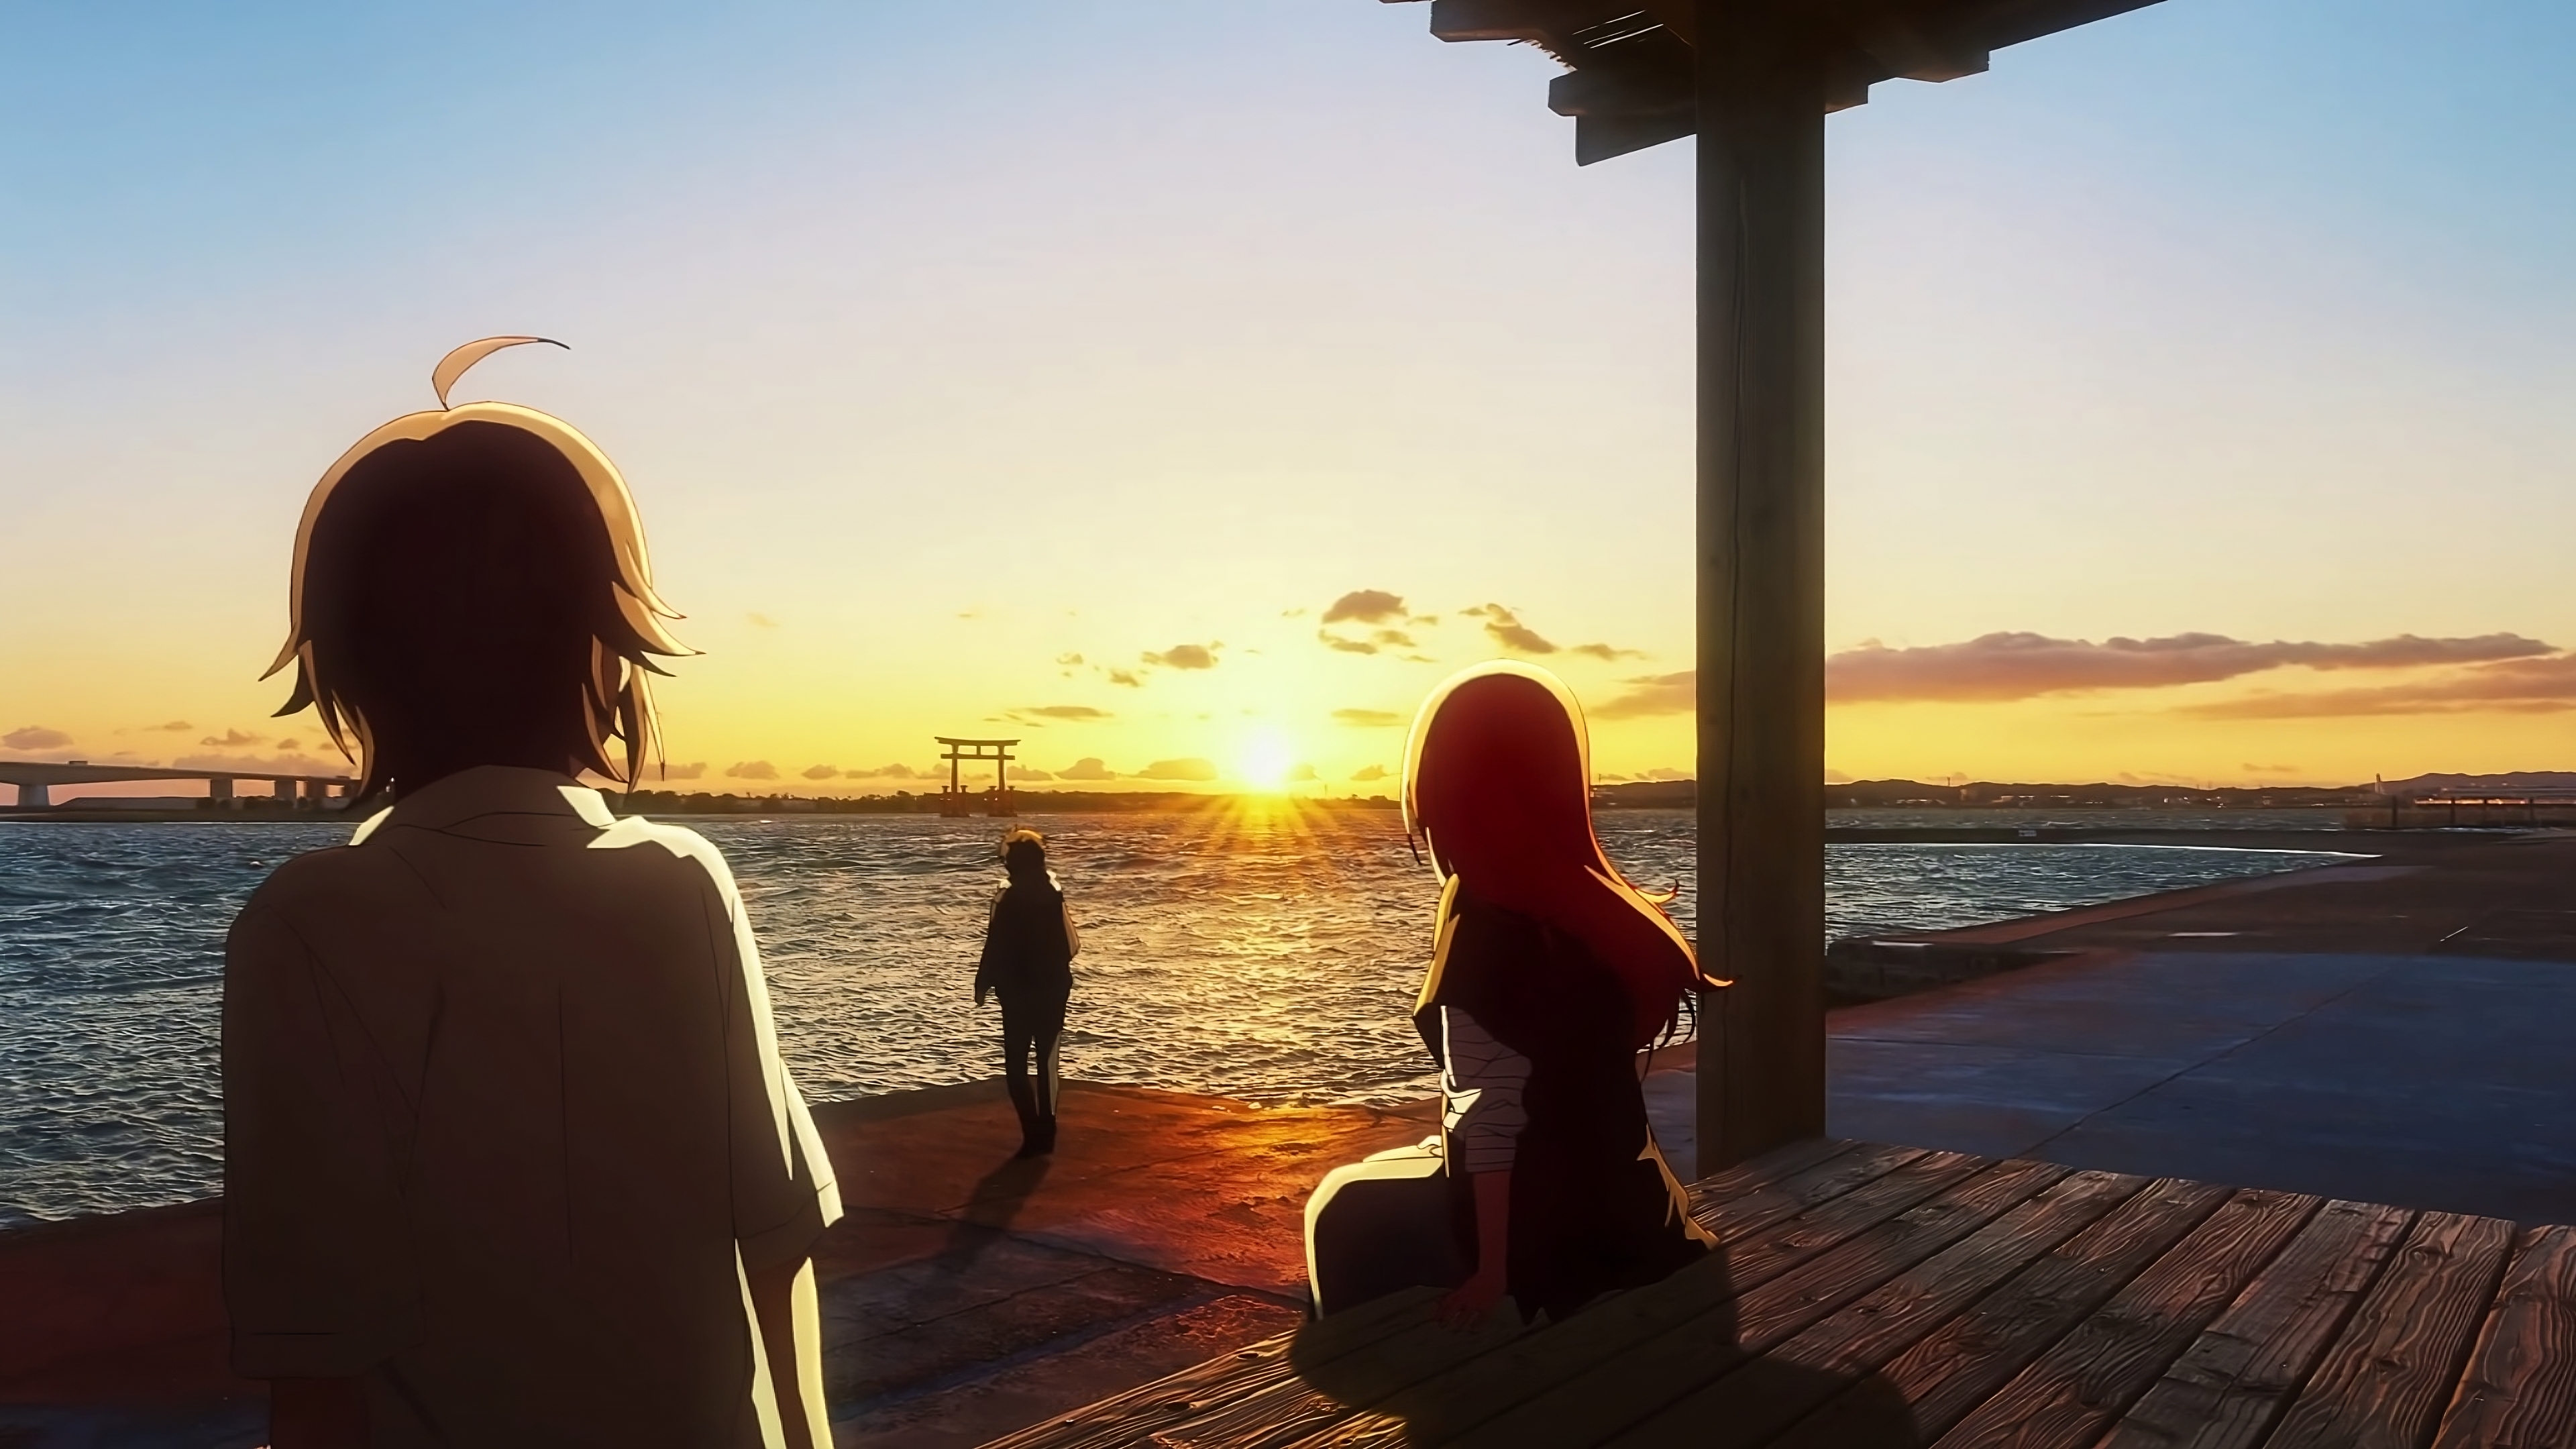 Anime 3840x2160 The Dreaming Boy is a Realist anime anime girls Anime screenshot water sunset sunset glow torii standing looking into the distance clouds sky anime boys animeirl